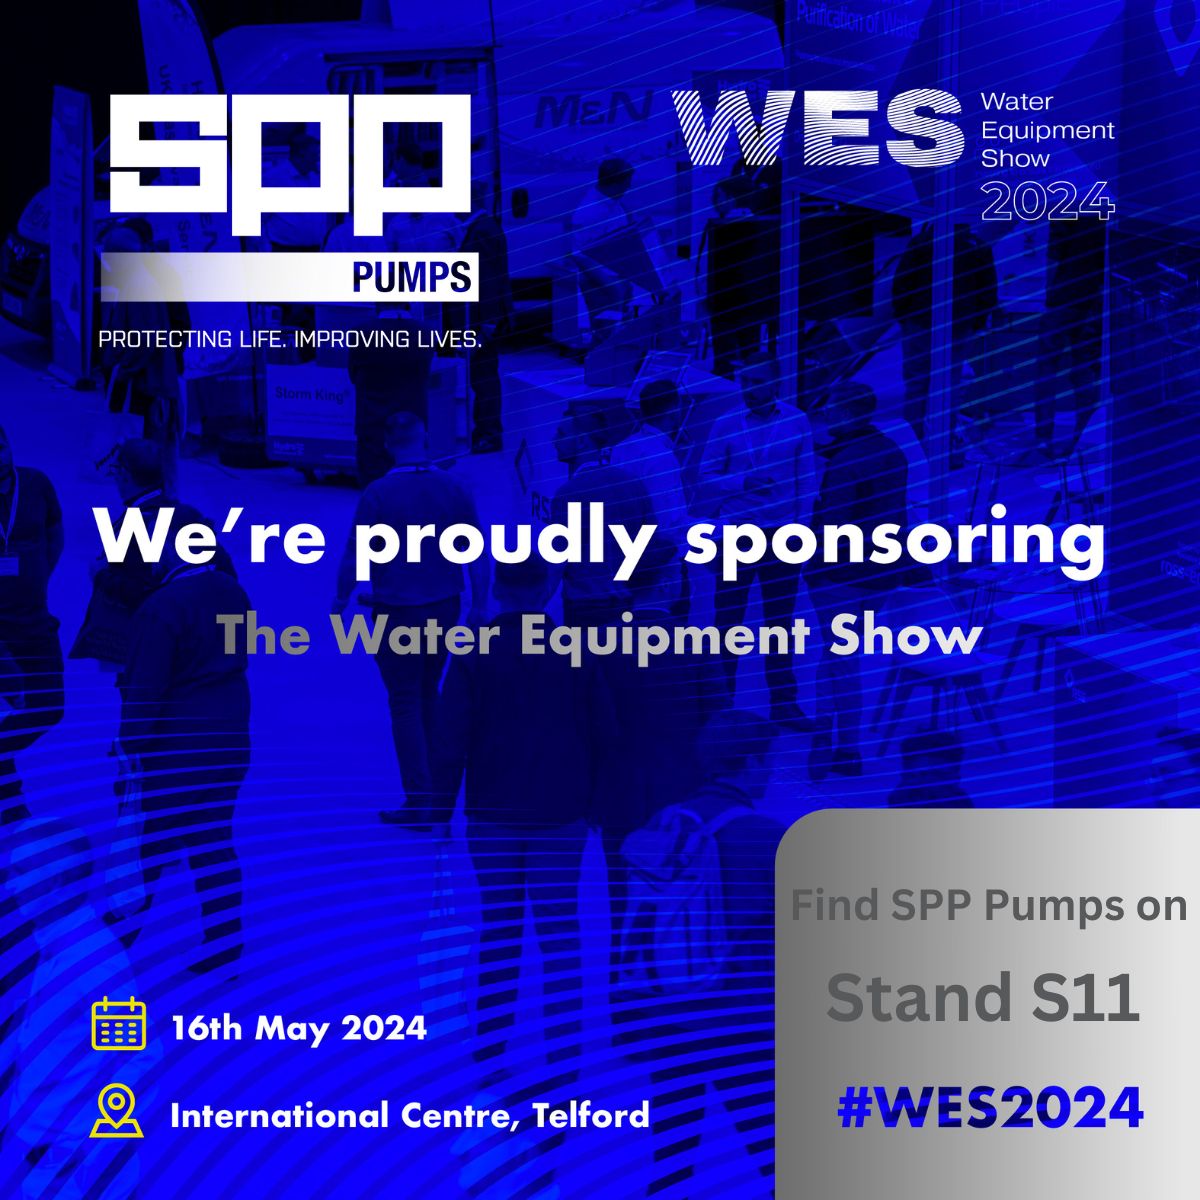 Preps are ongoing for the Water Equipment Show hashtag#WES2024 on 16th May, where we are very pleased to be one of the Sponsors. Pop to Stand S11 for an AR pump experience and to hear the latest.

Head for the International Centre, Telford  - we look forward to seeing you there!